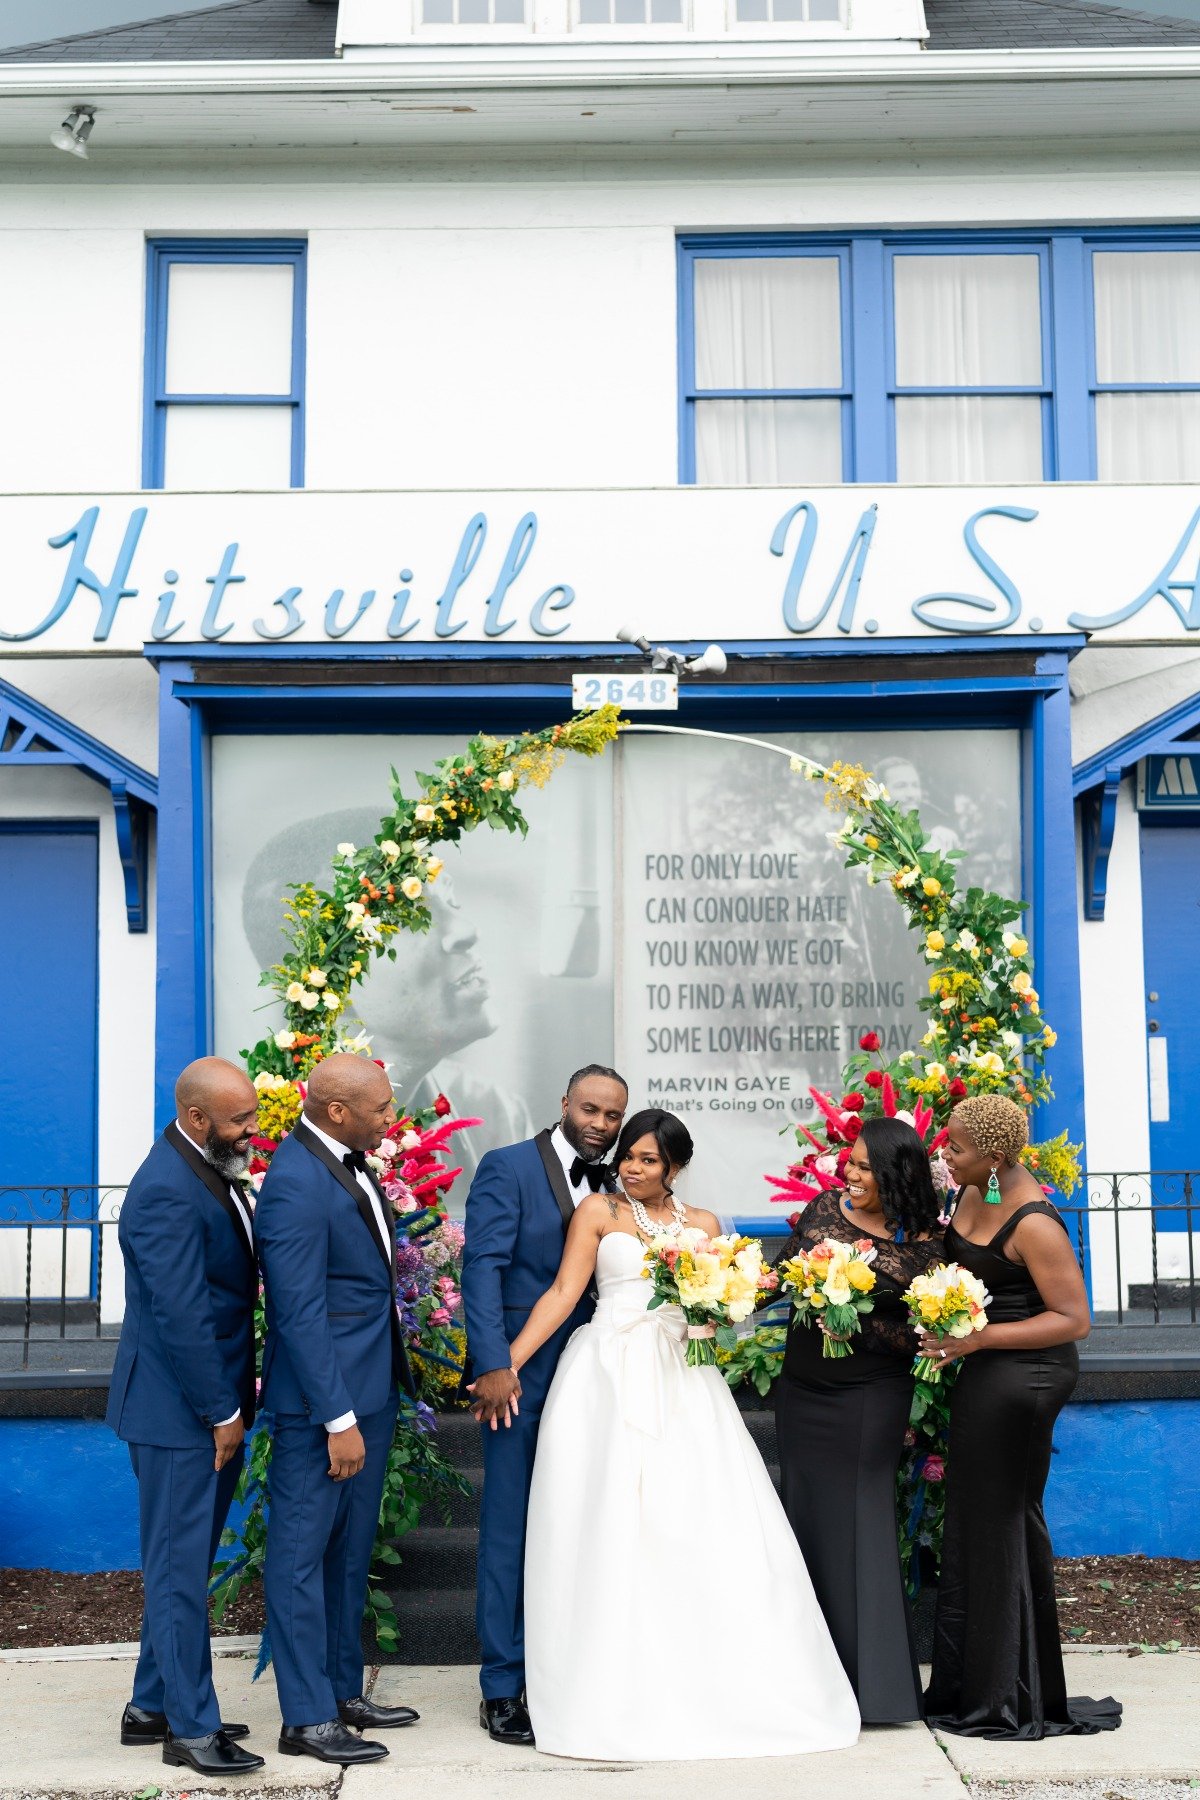 Celebrating Juneteenth And Black Love With This Joyous Motown-Inspired Shoot In The Heart Of Detroit